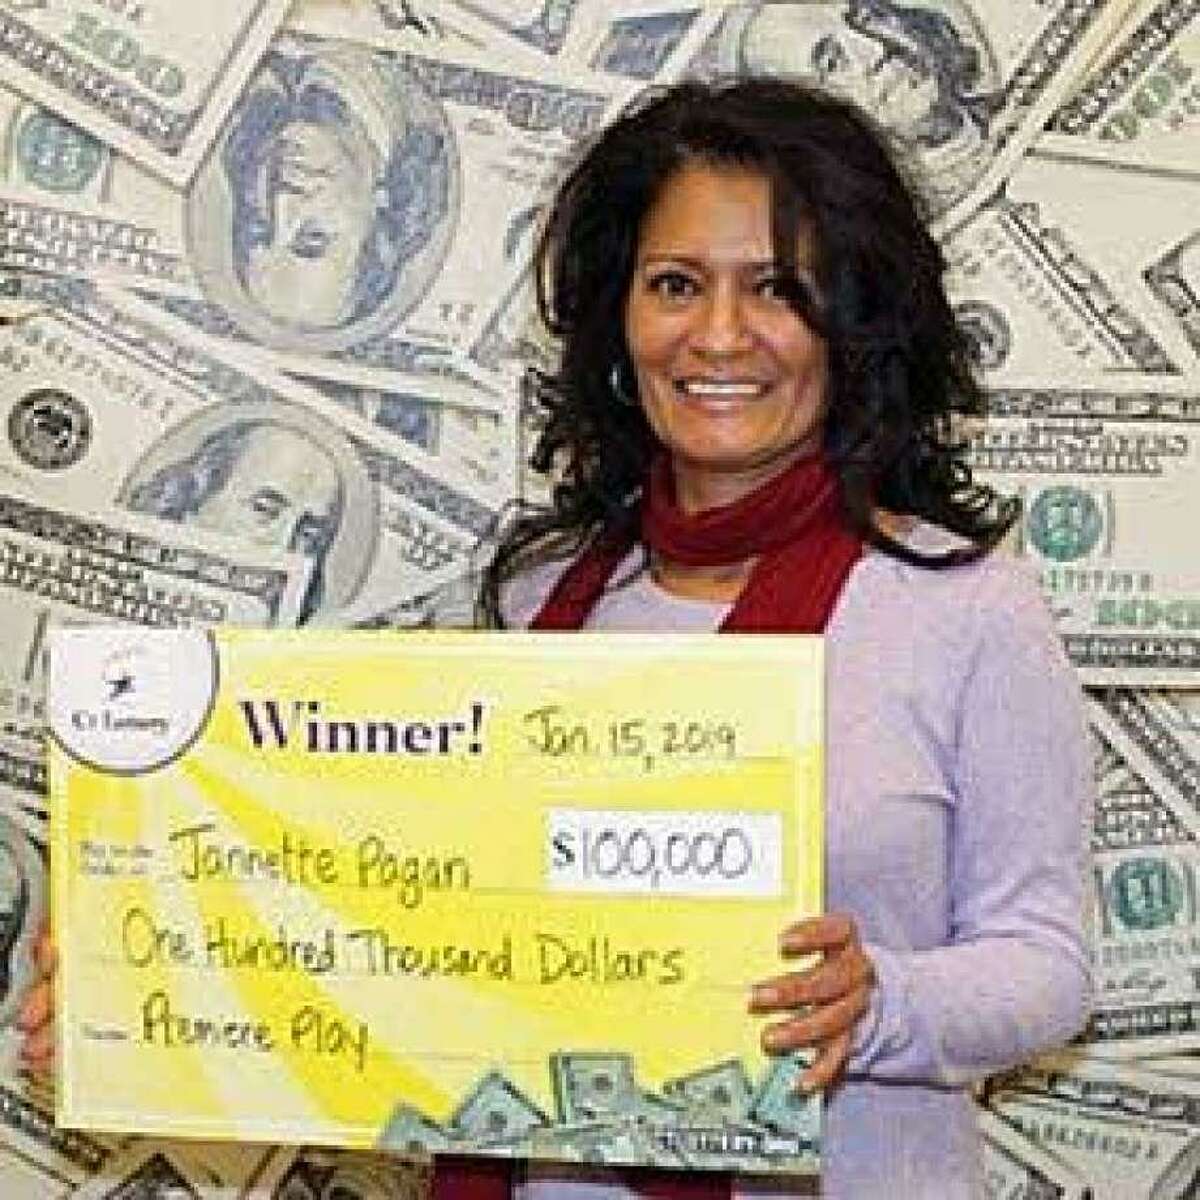 Jannette Pagan, of Bridgeport; $100,000 on a Premiere Play ticket sold at Grocery Village in Bridgeport. Pagan was hoping to win at least $100 when she purchased the ticket. But when she scratched off her ticket and found a winning number match - not with a prize for $100, but one for $100,000.